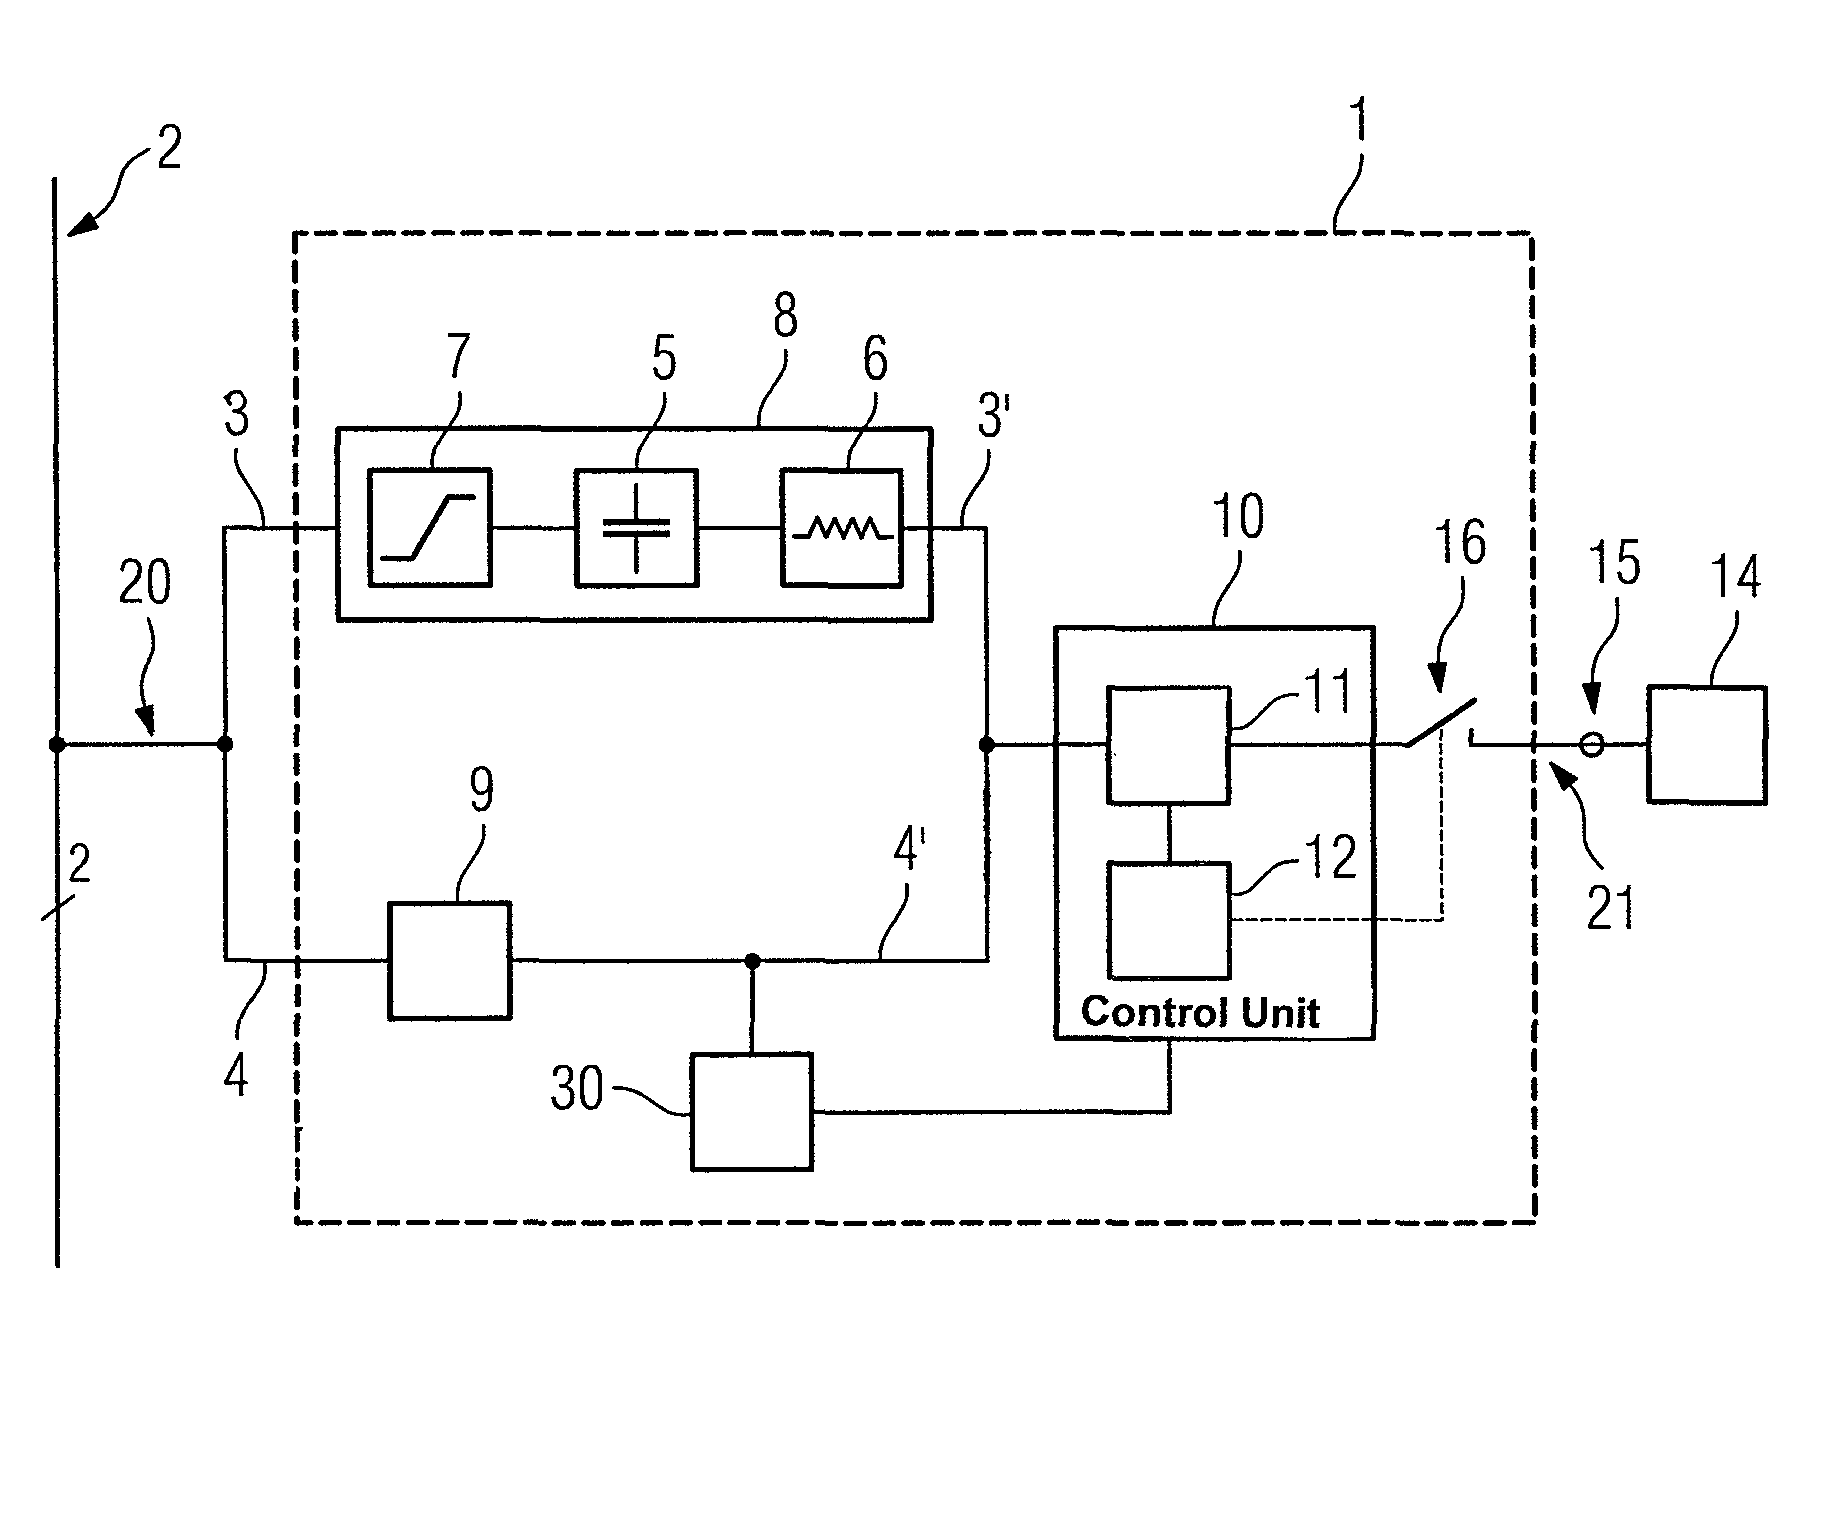 Connecting apparatus for connection of field devices